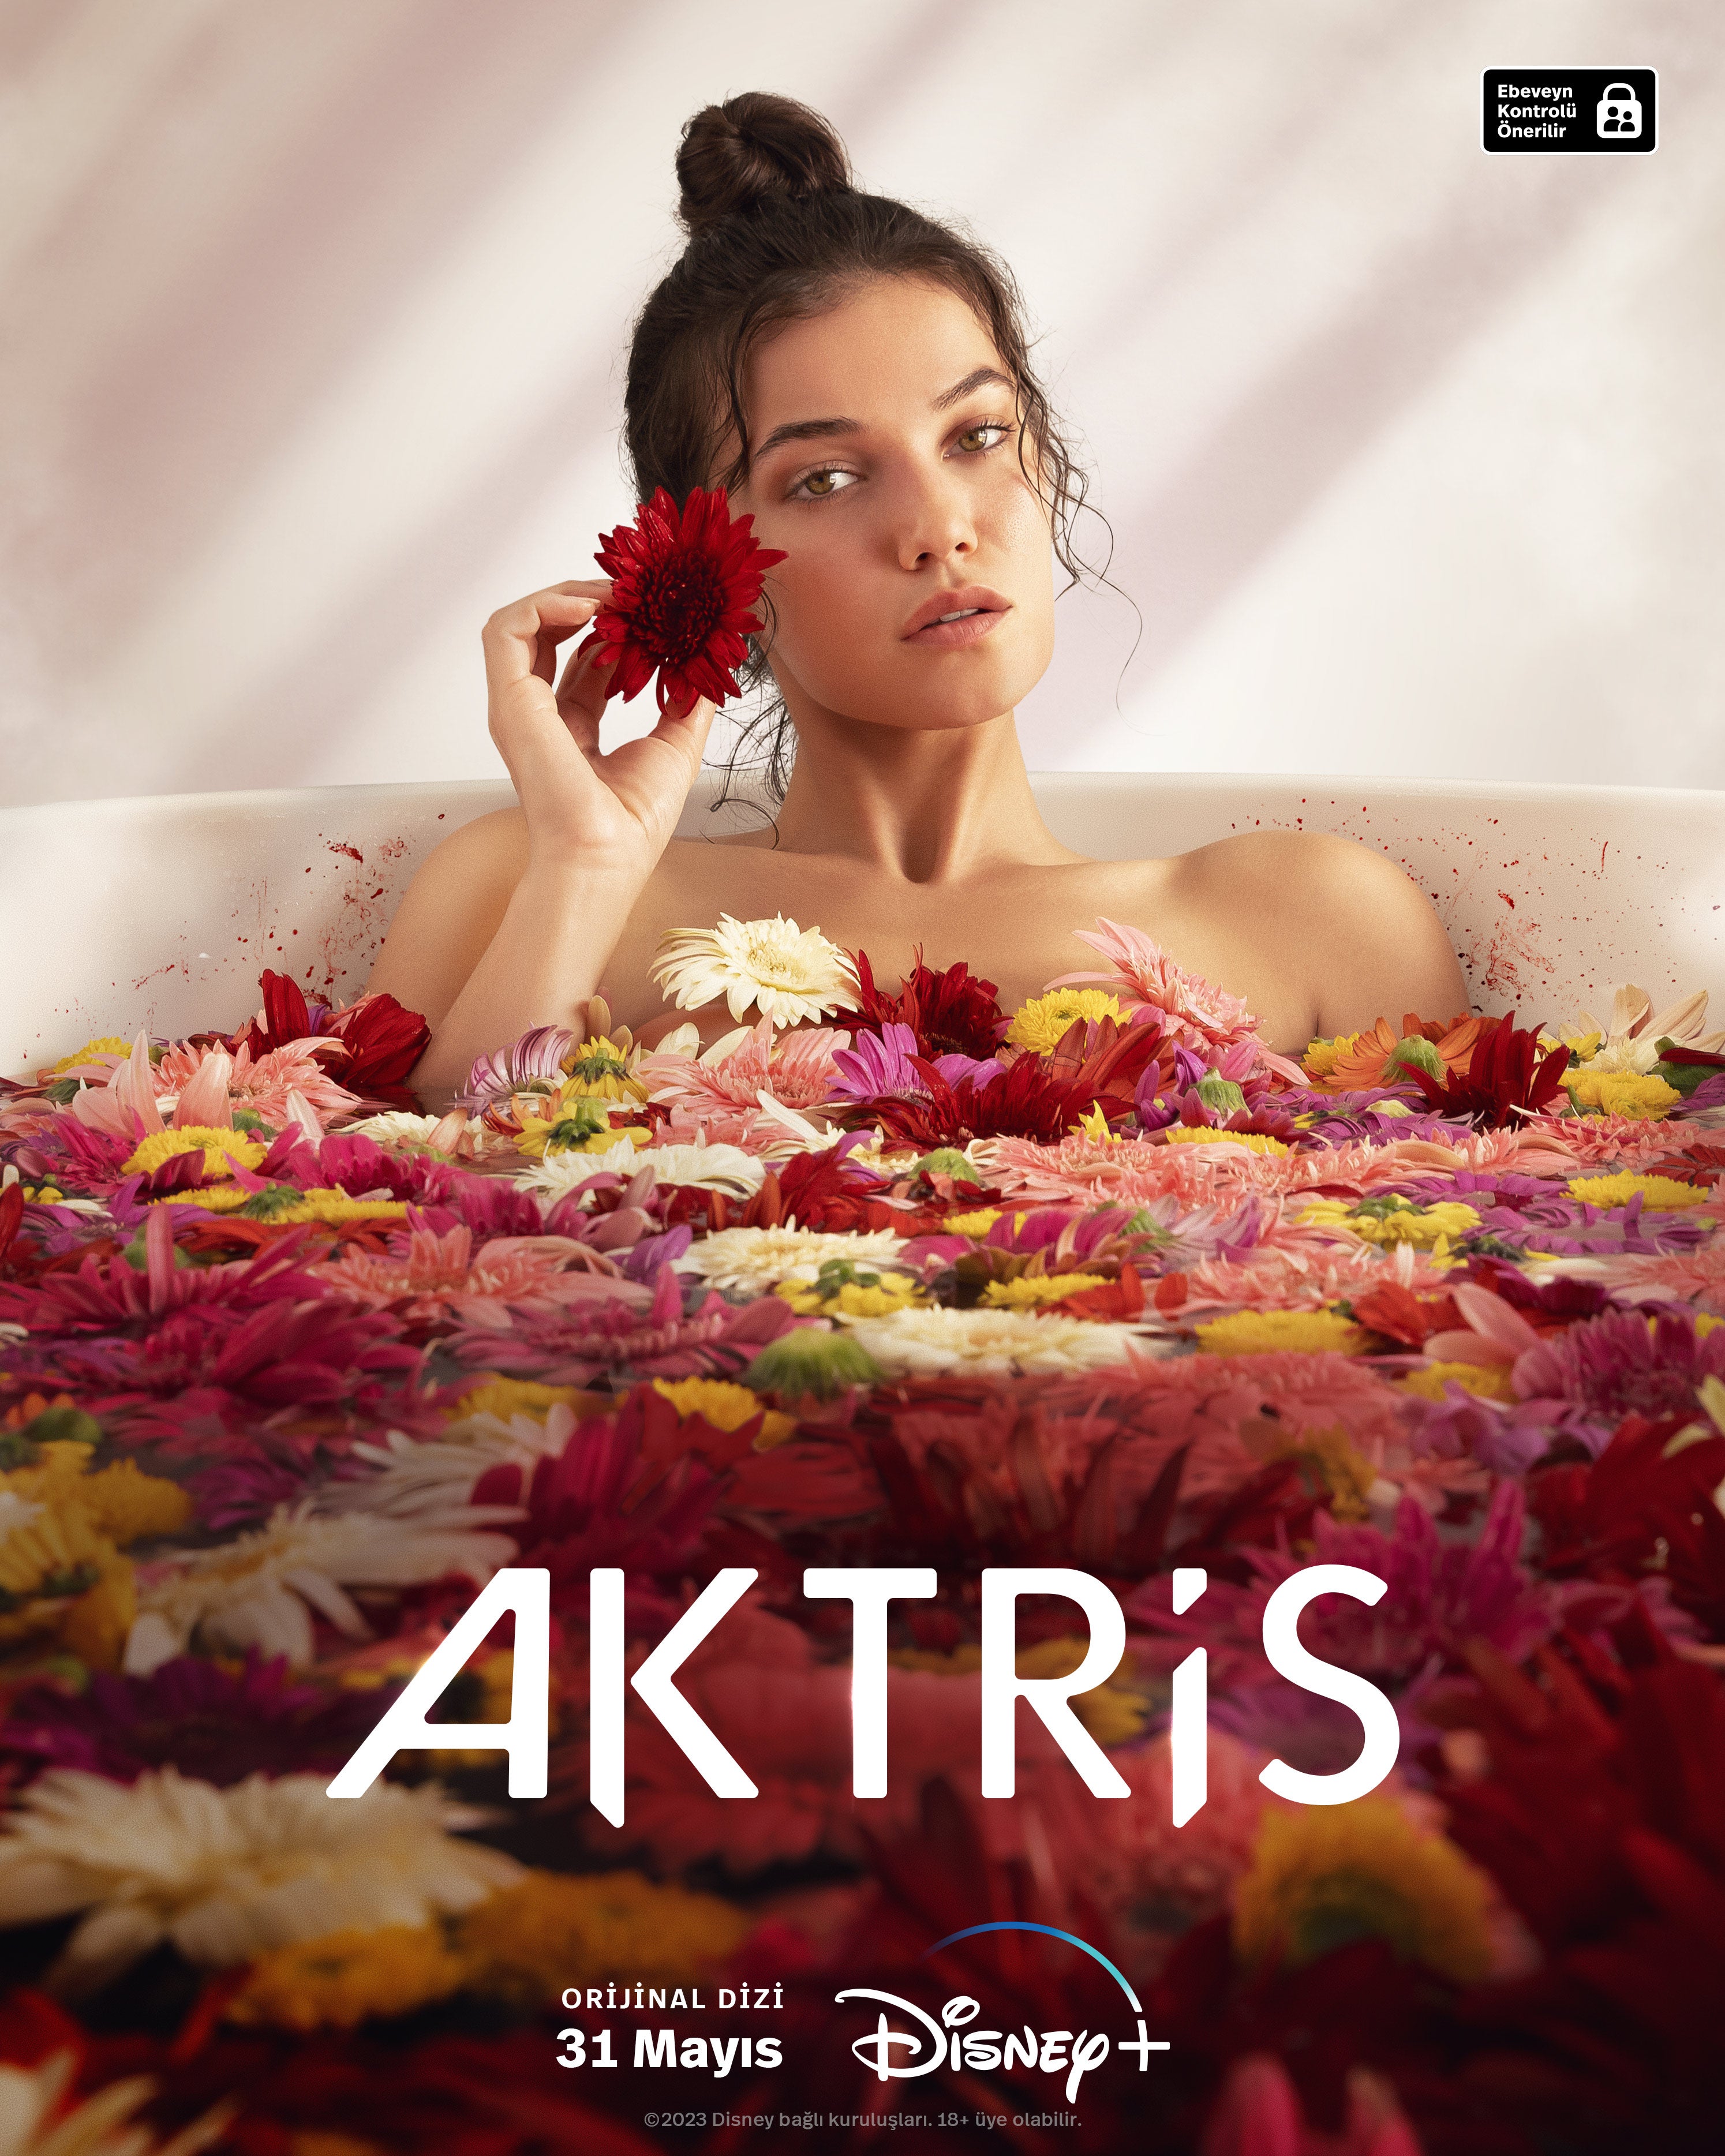 TV ratings for Actress (Aktris) in Netherlands. Disney+ TV series